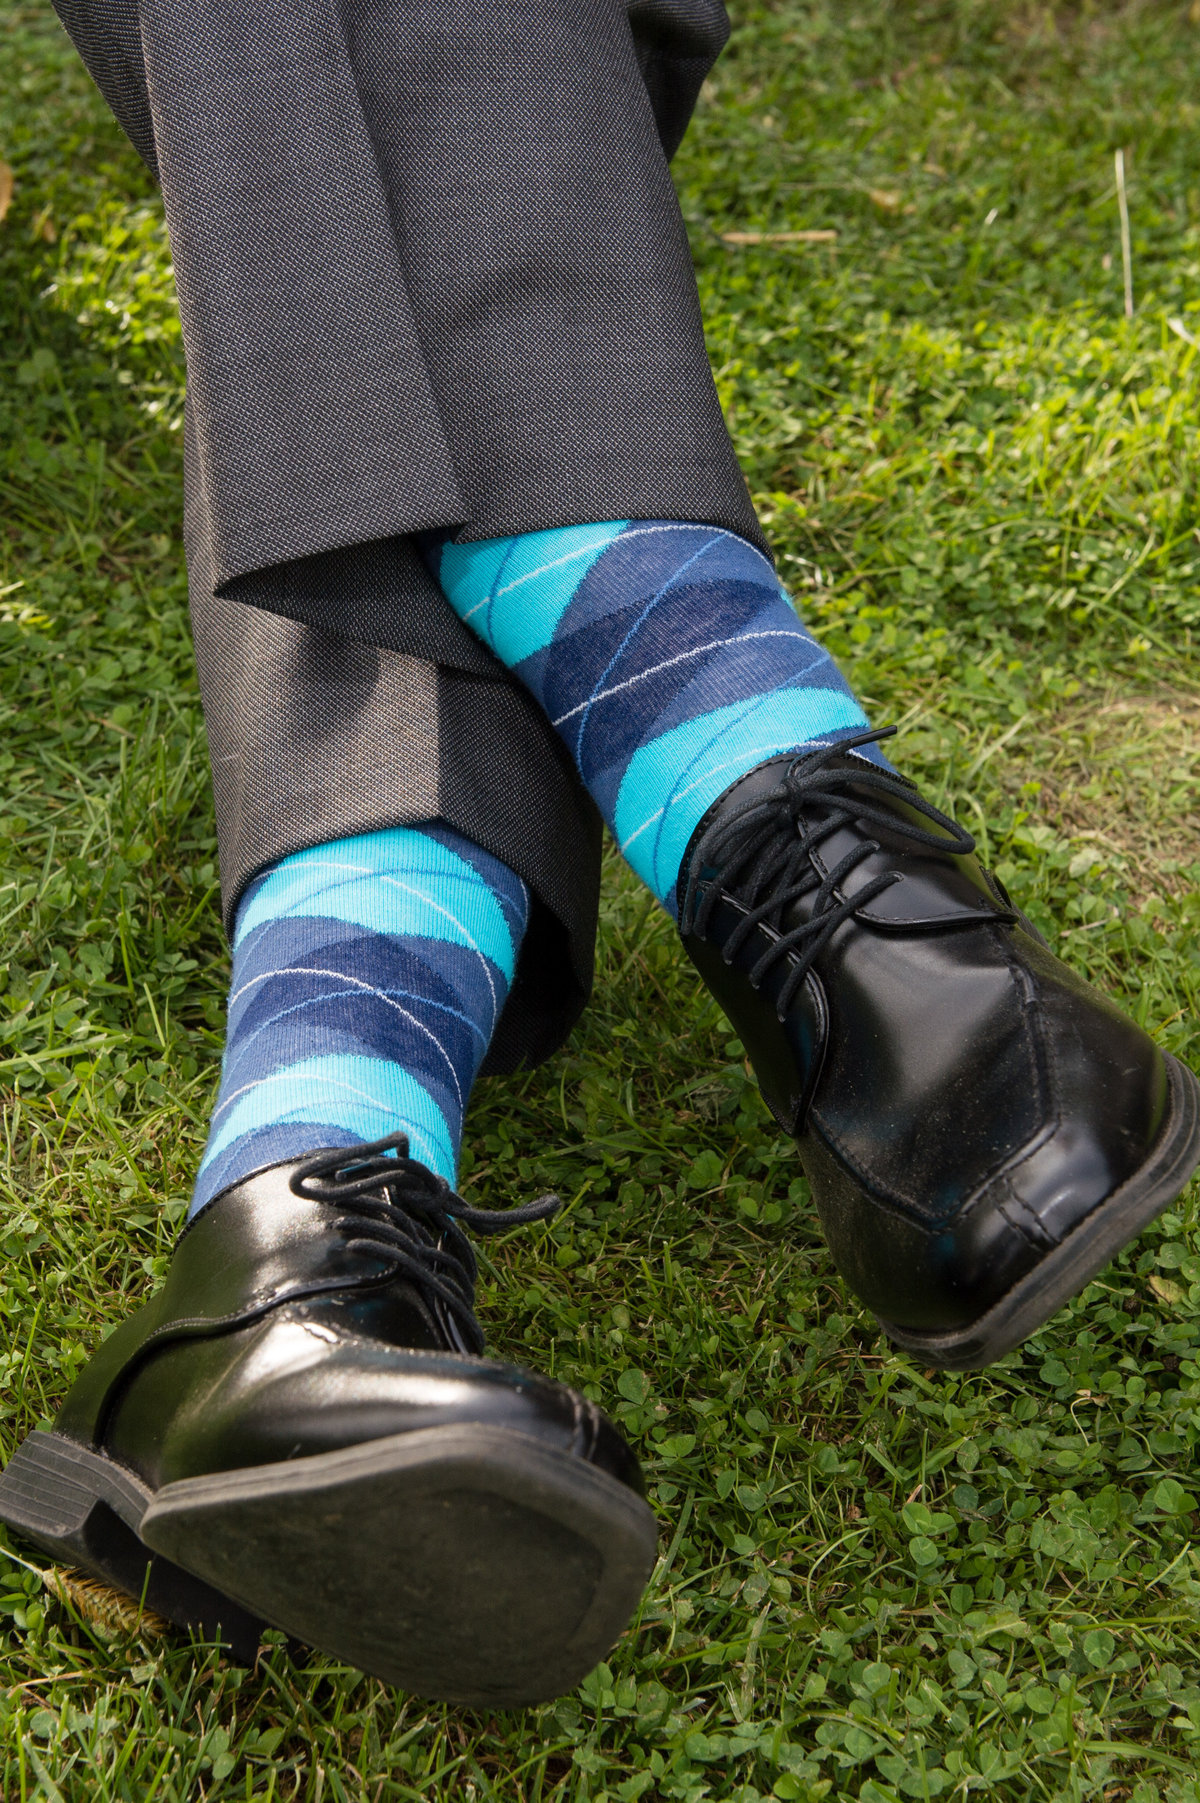 argyle socks and shiny shoes feet crossed color photo